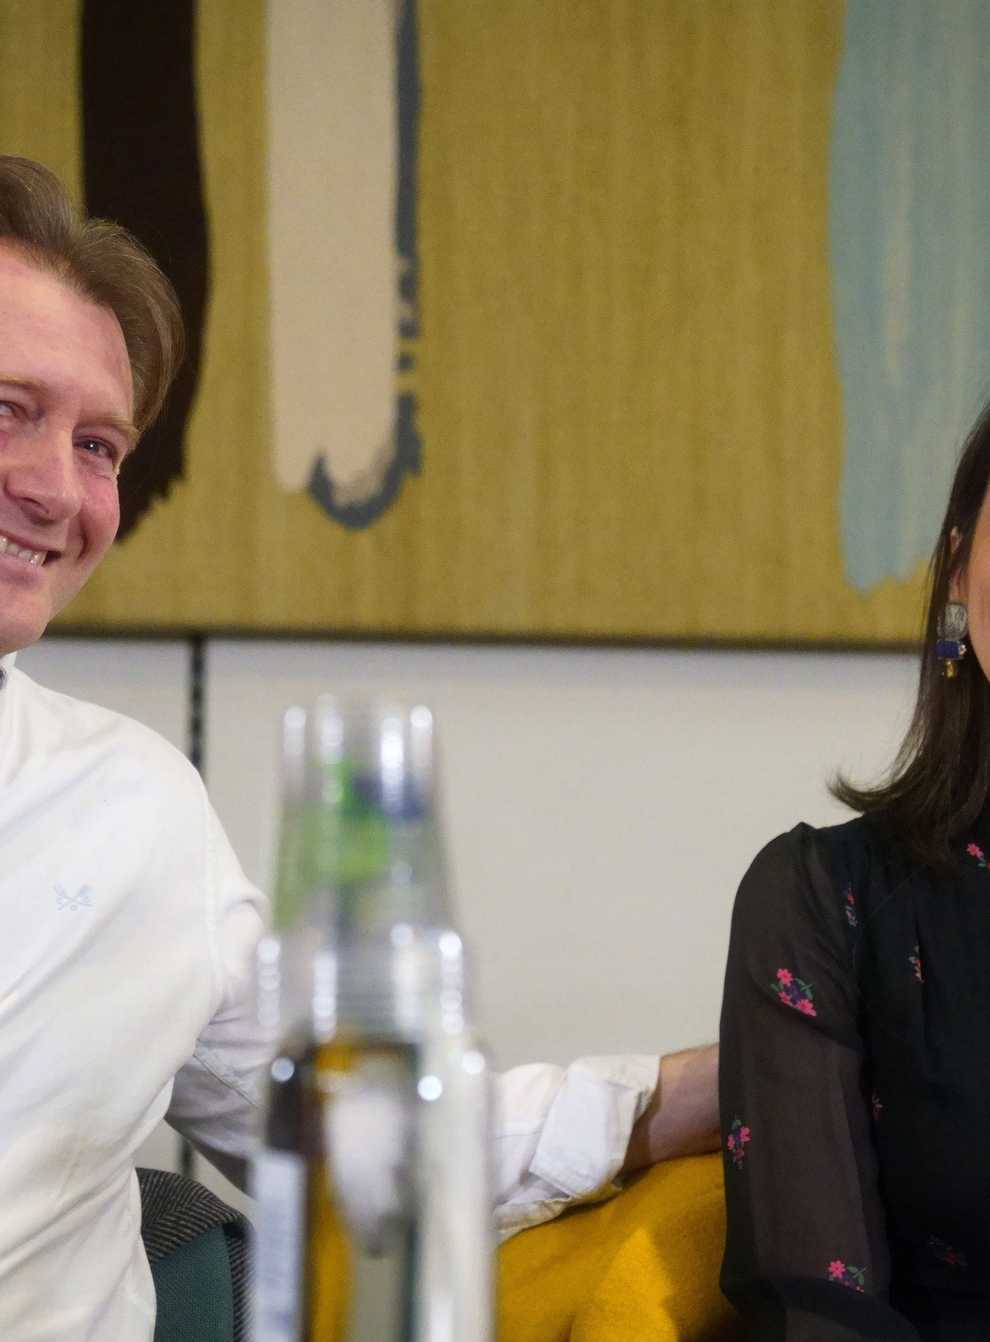 Nazanin Zaghari-Ratcliffe and Richard Ratcliffe during a press conference hosted by their local MP Tulip Siddiq, in the Macmillan Room, Portcullis House, London, following her release from detention in Iran last week. Picture date: Monday March 21, 2022.